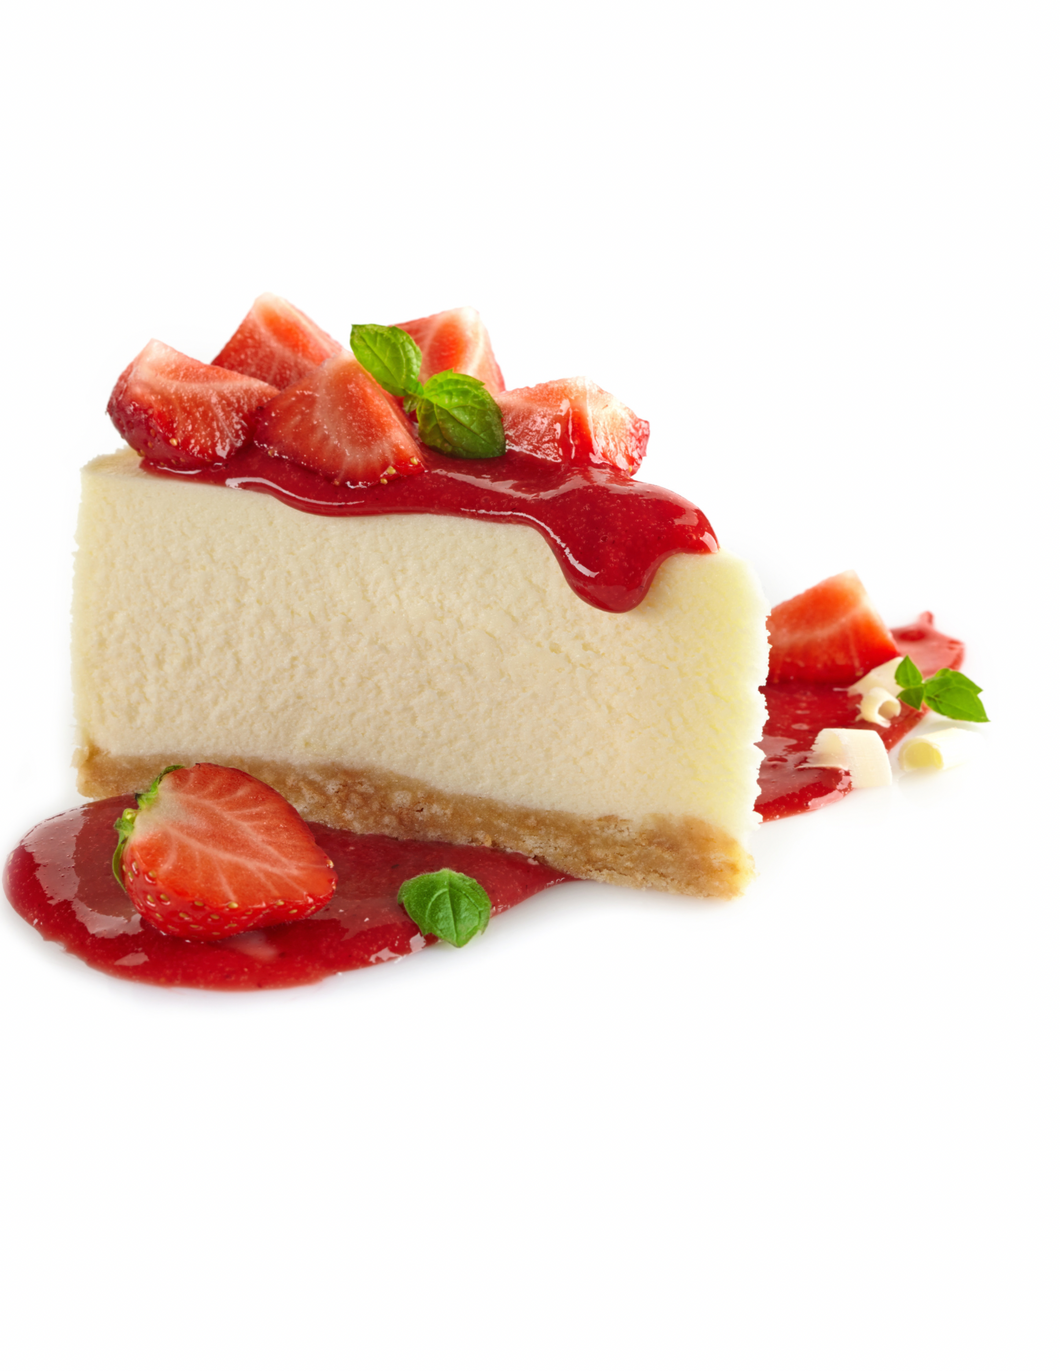 Strawberry topped cheesecake